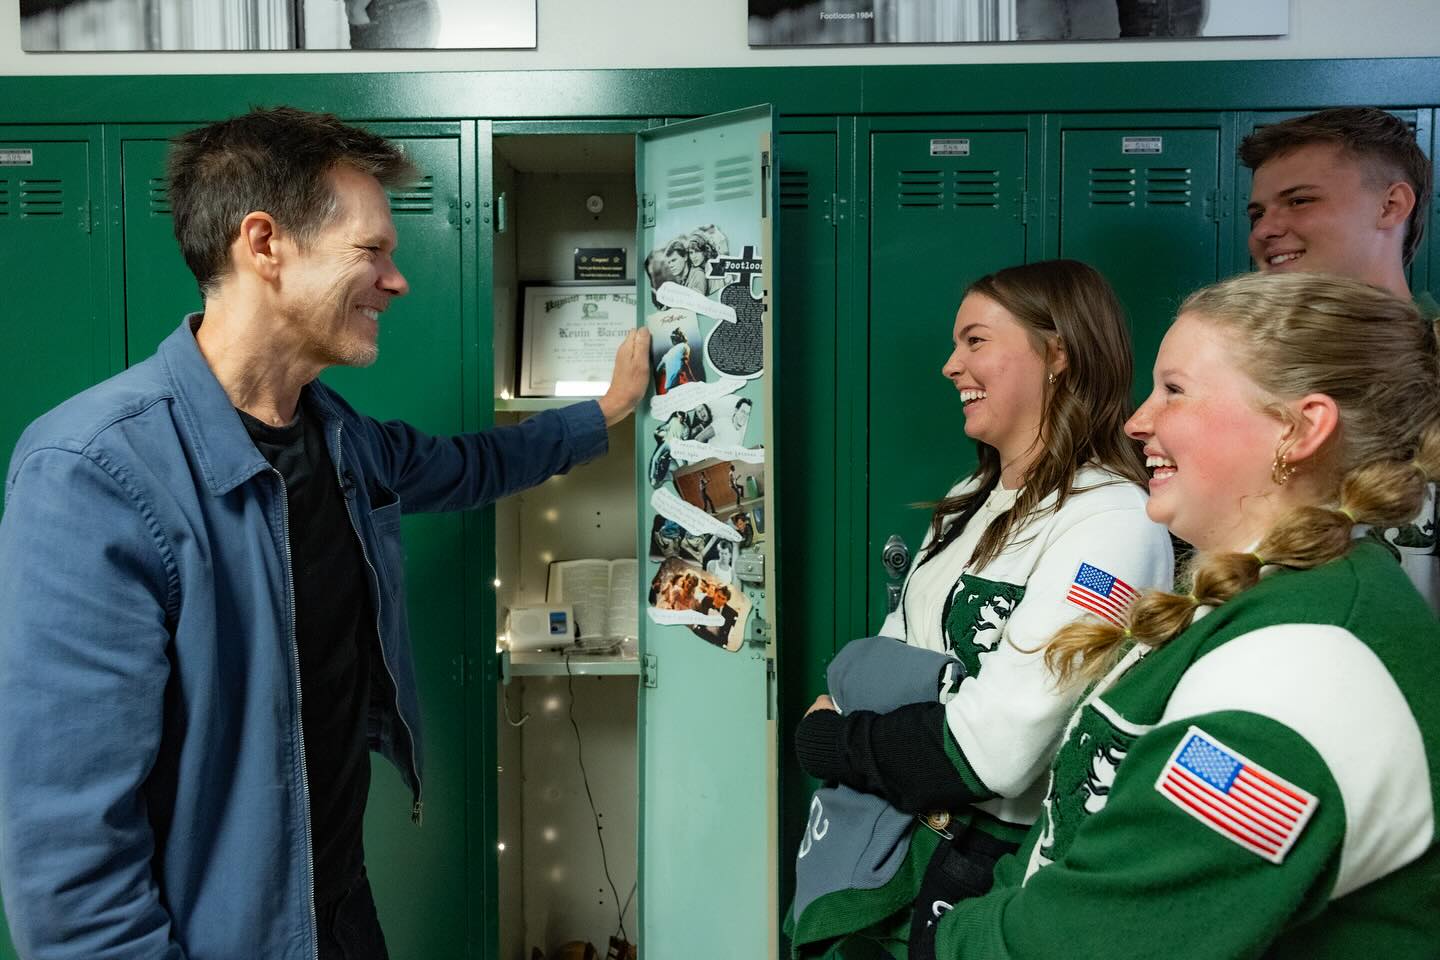 Kevin Bacon laughs wiht students in front of lockers